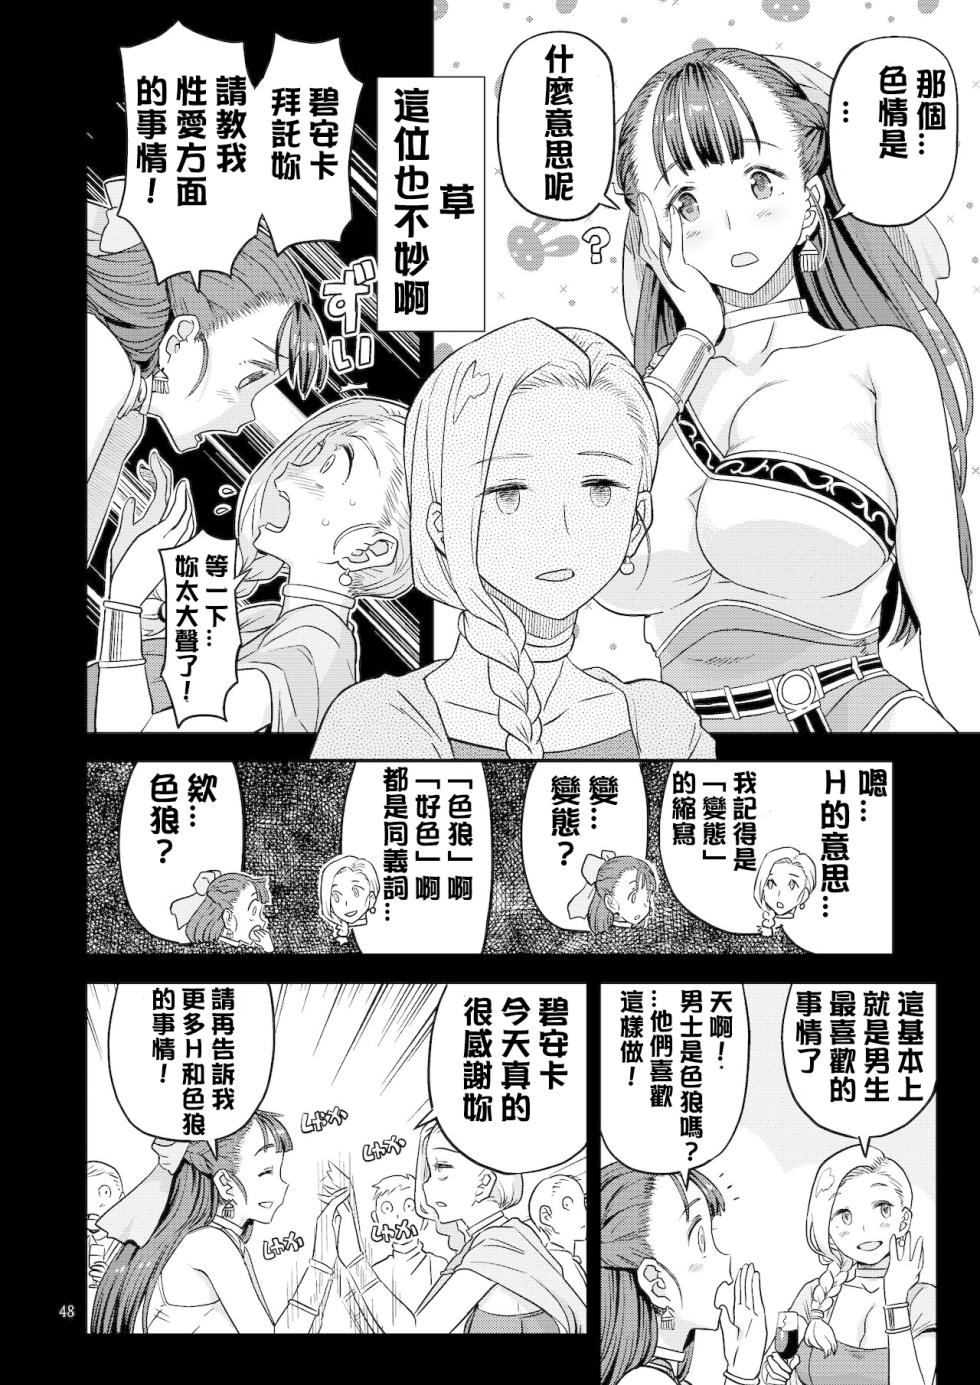 [Gadget Koubou (Various)(A-10)] Dragon Quest One Thousand and One Nights (Dragon Quest) [Digital]  【Chinese】【QTE中文翻譯】 - Page 5